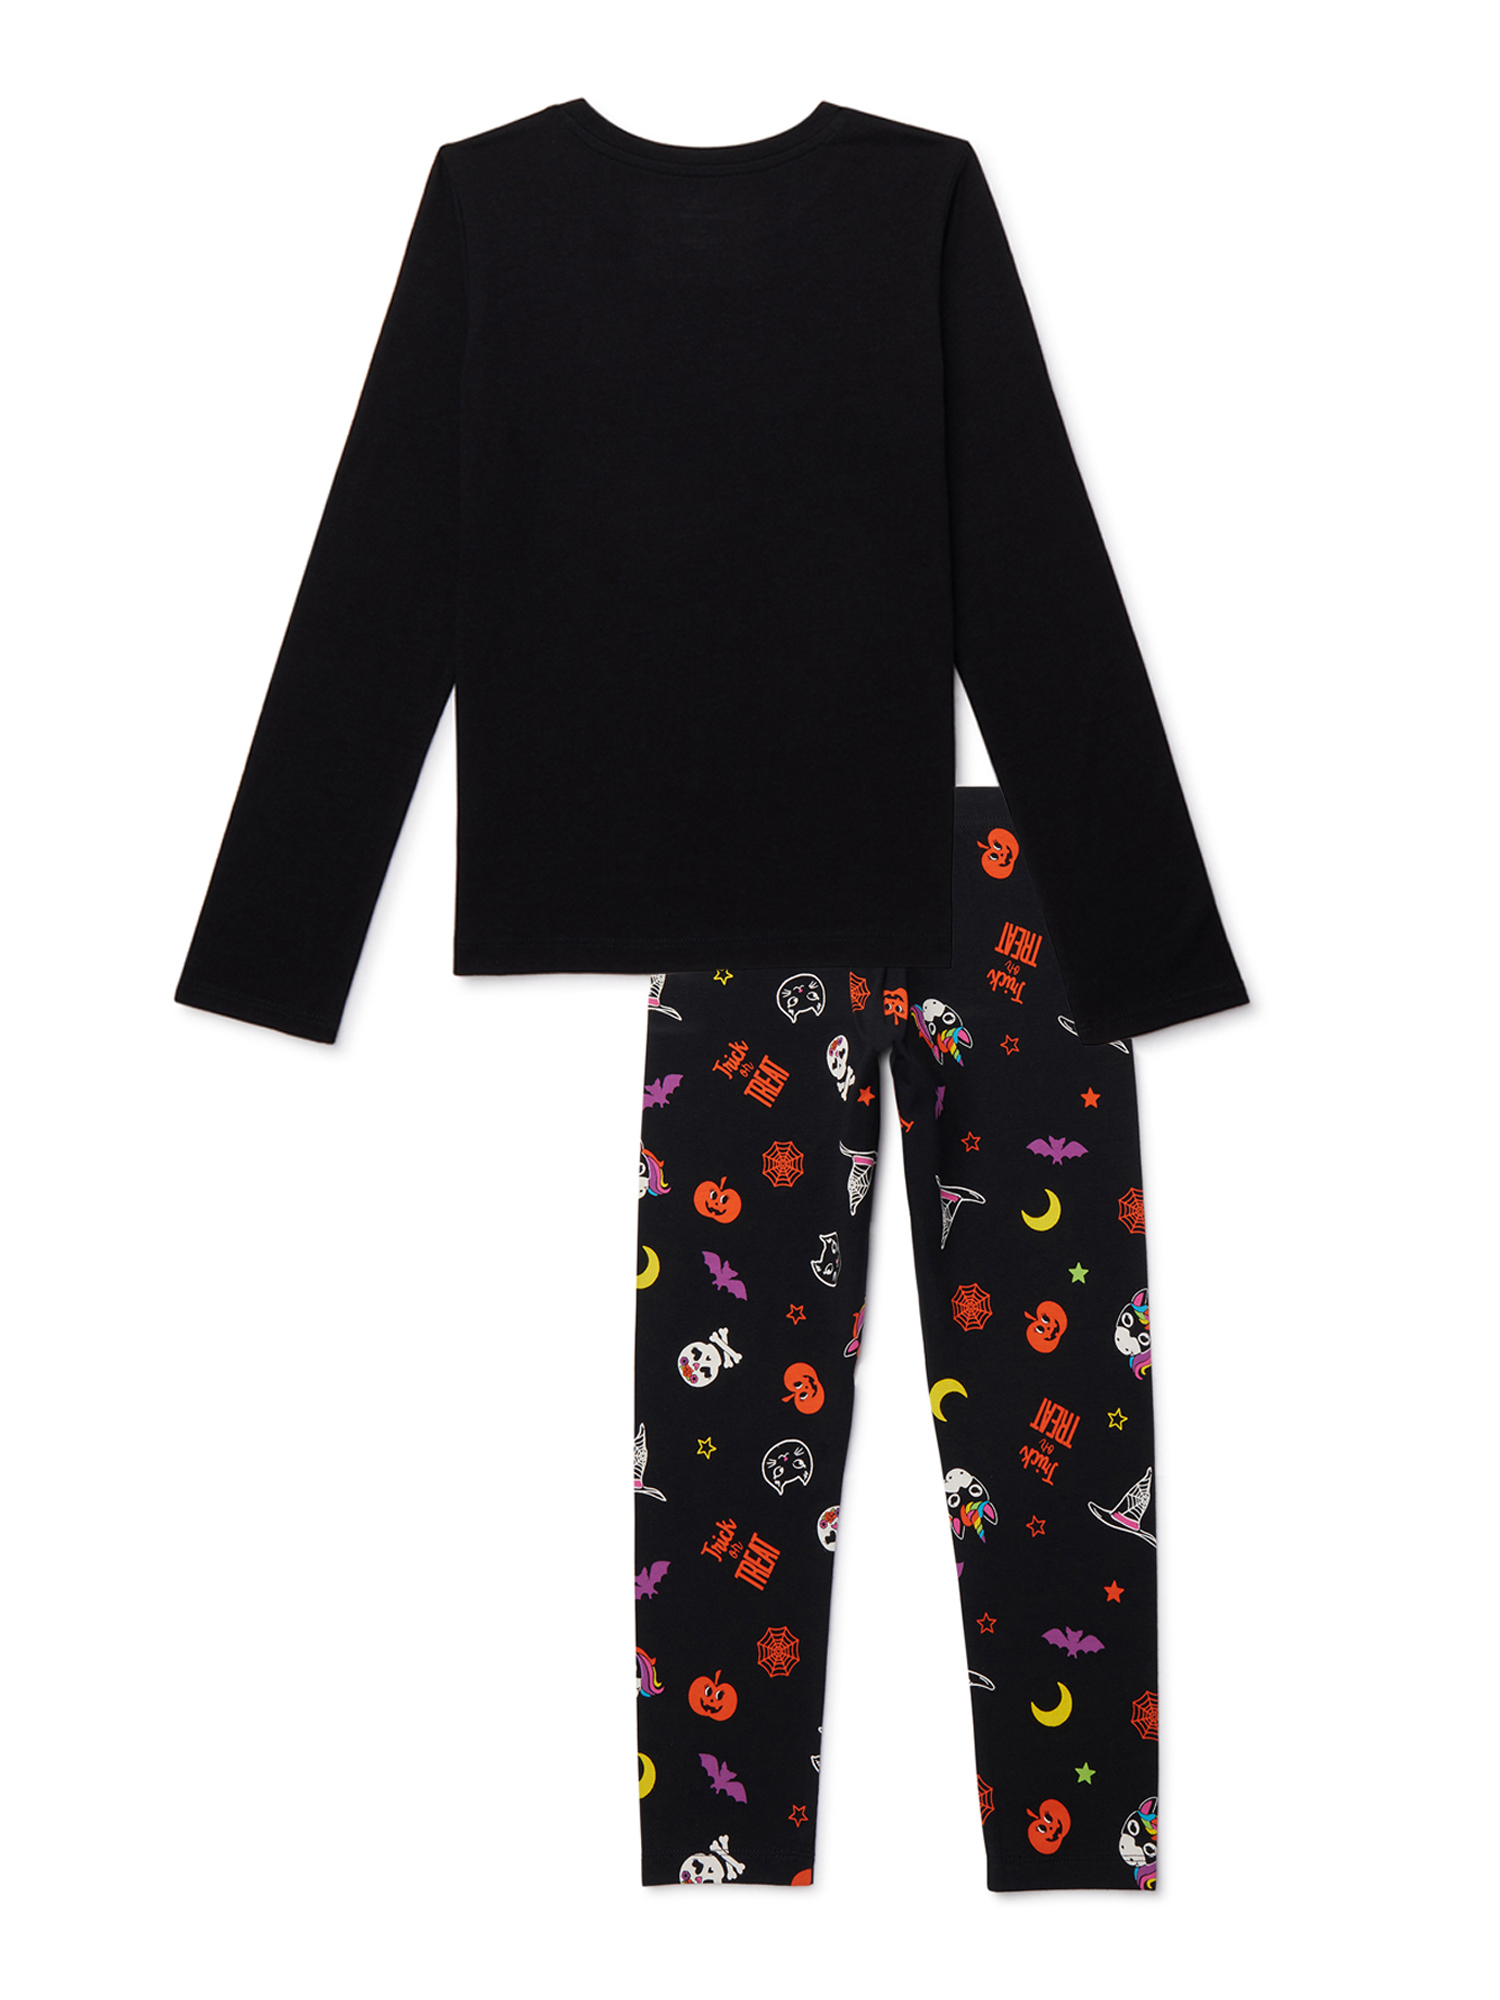 Halloween Girls Graphic Top and Leggings Outfit Set, 2-Piece, Sizes 4-18 - image 3 of 4